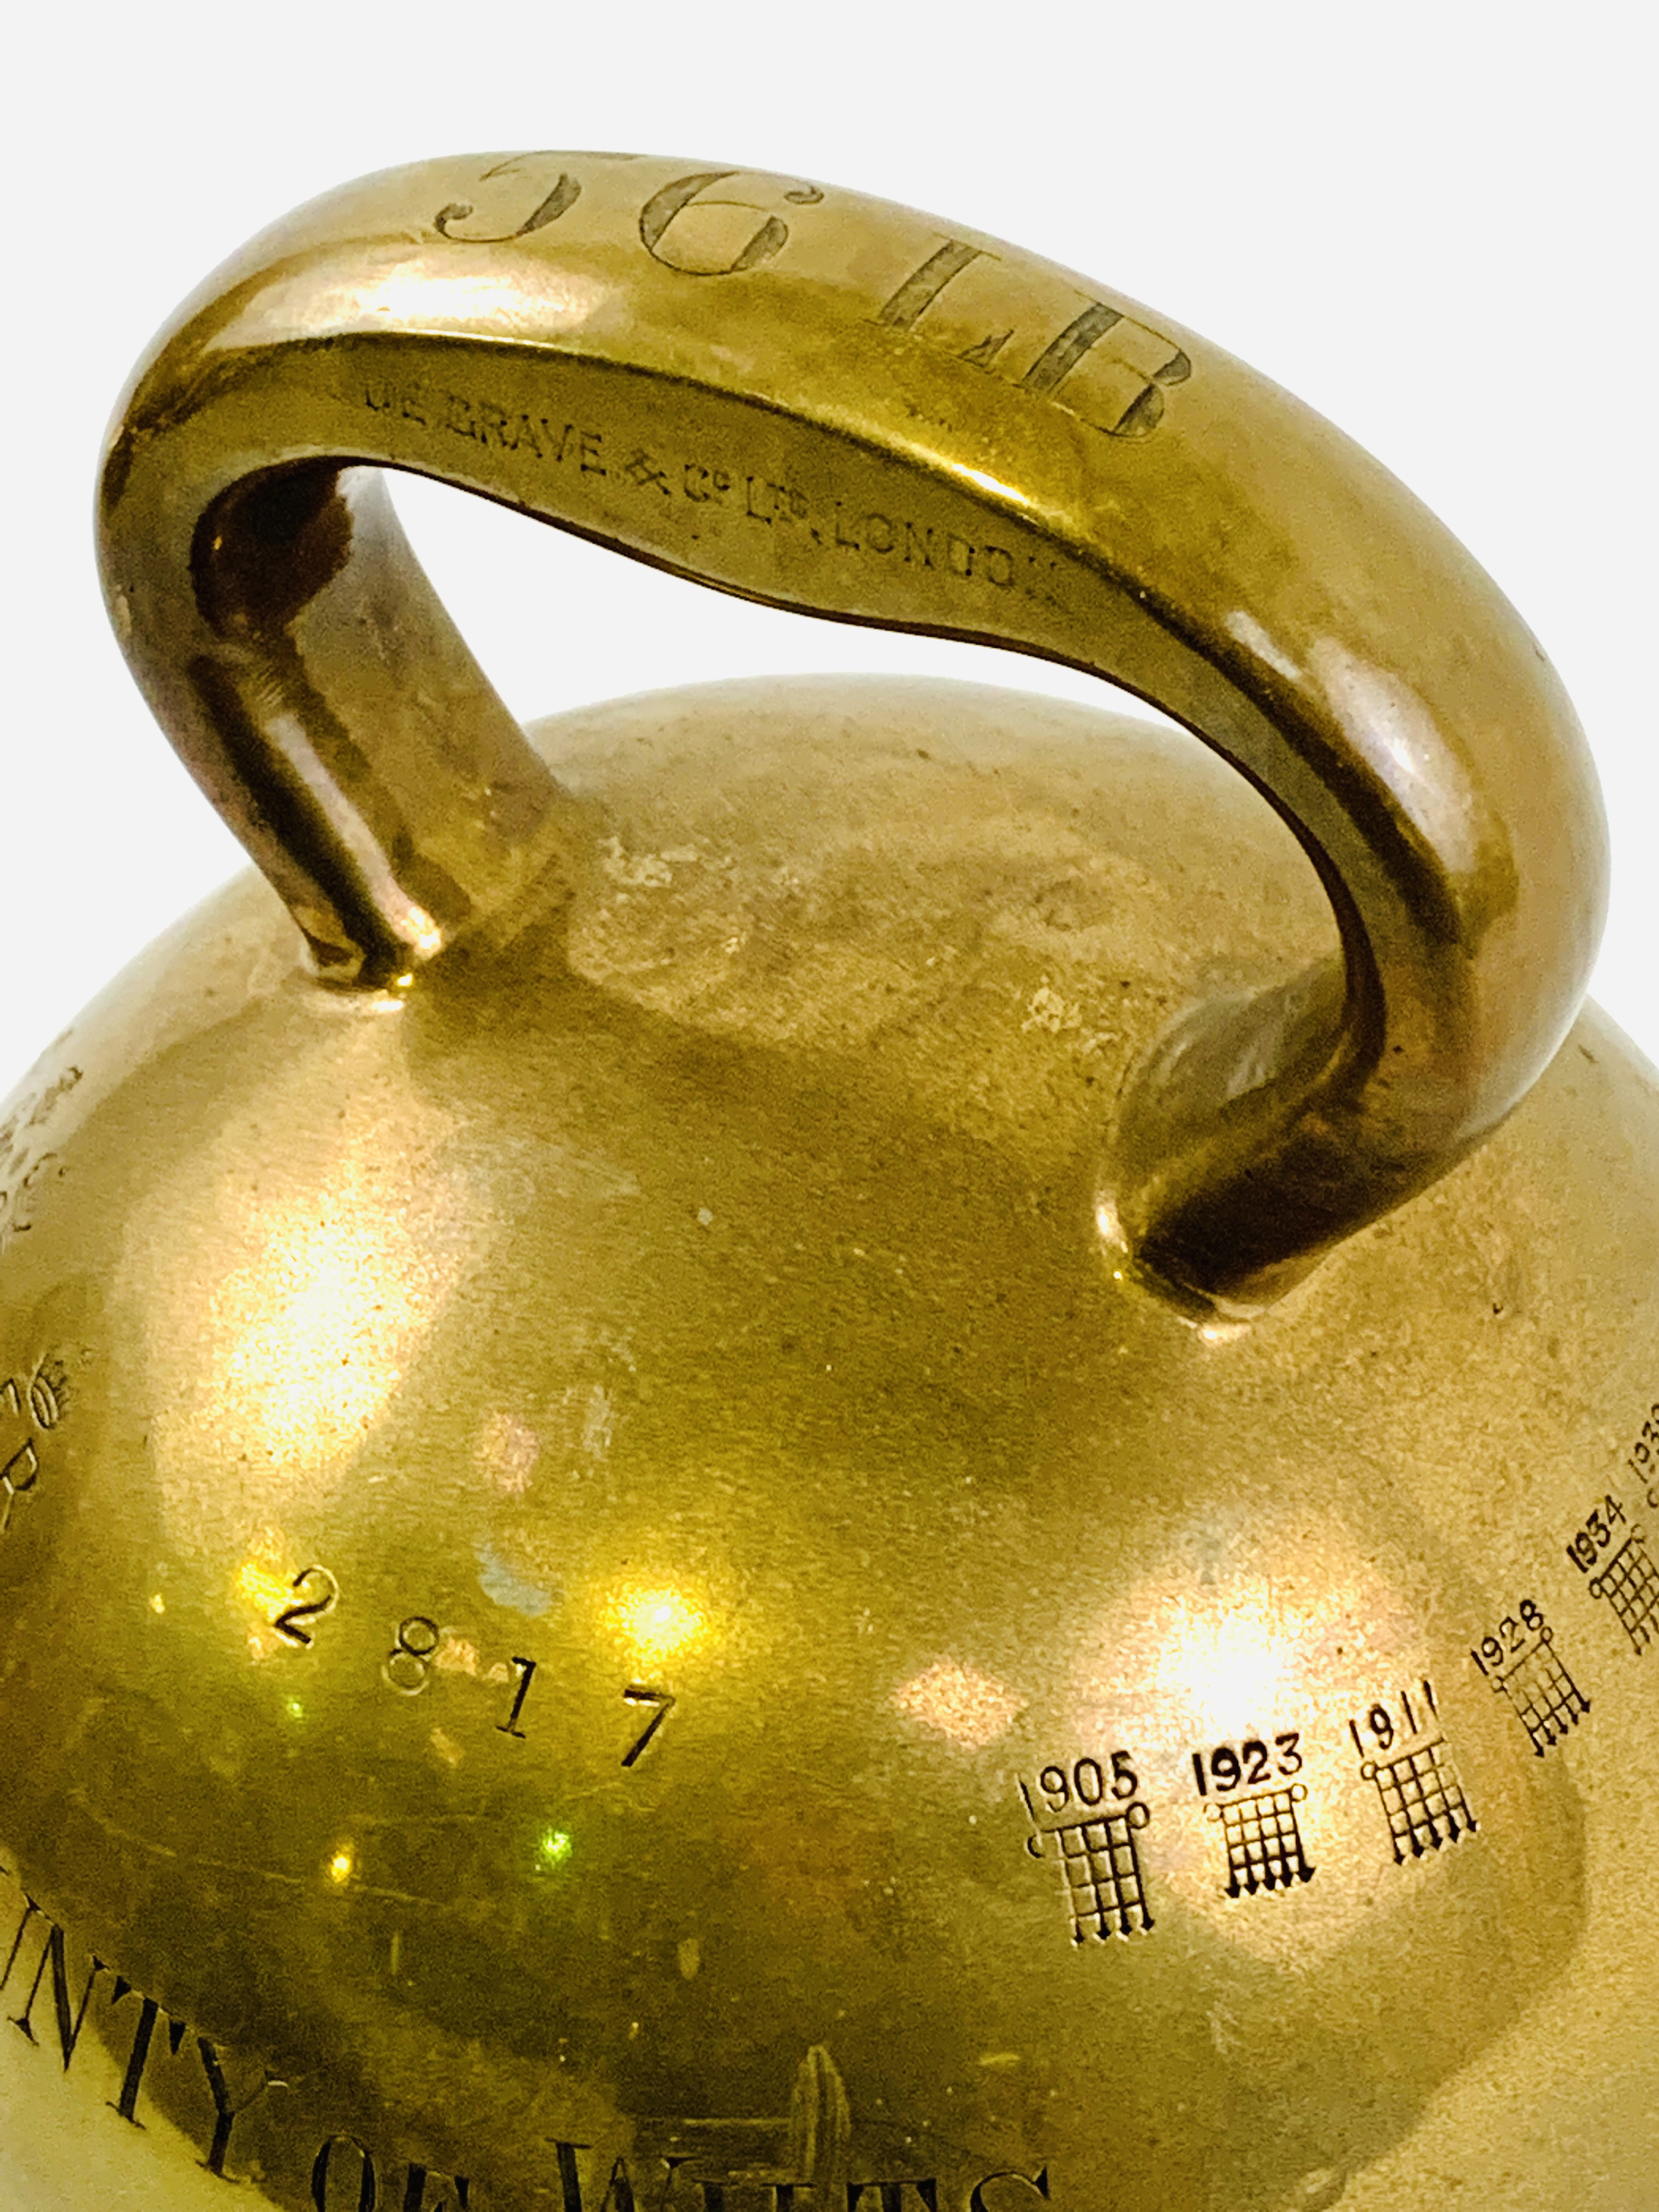 Brass alloy 56lbs proof weight in the shape of a dumbbell - Image 3 of 5